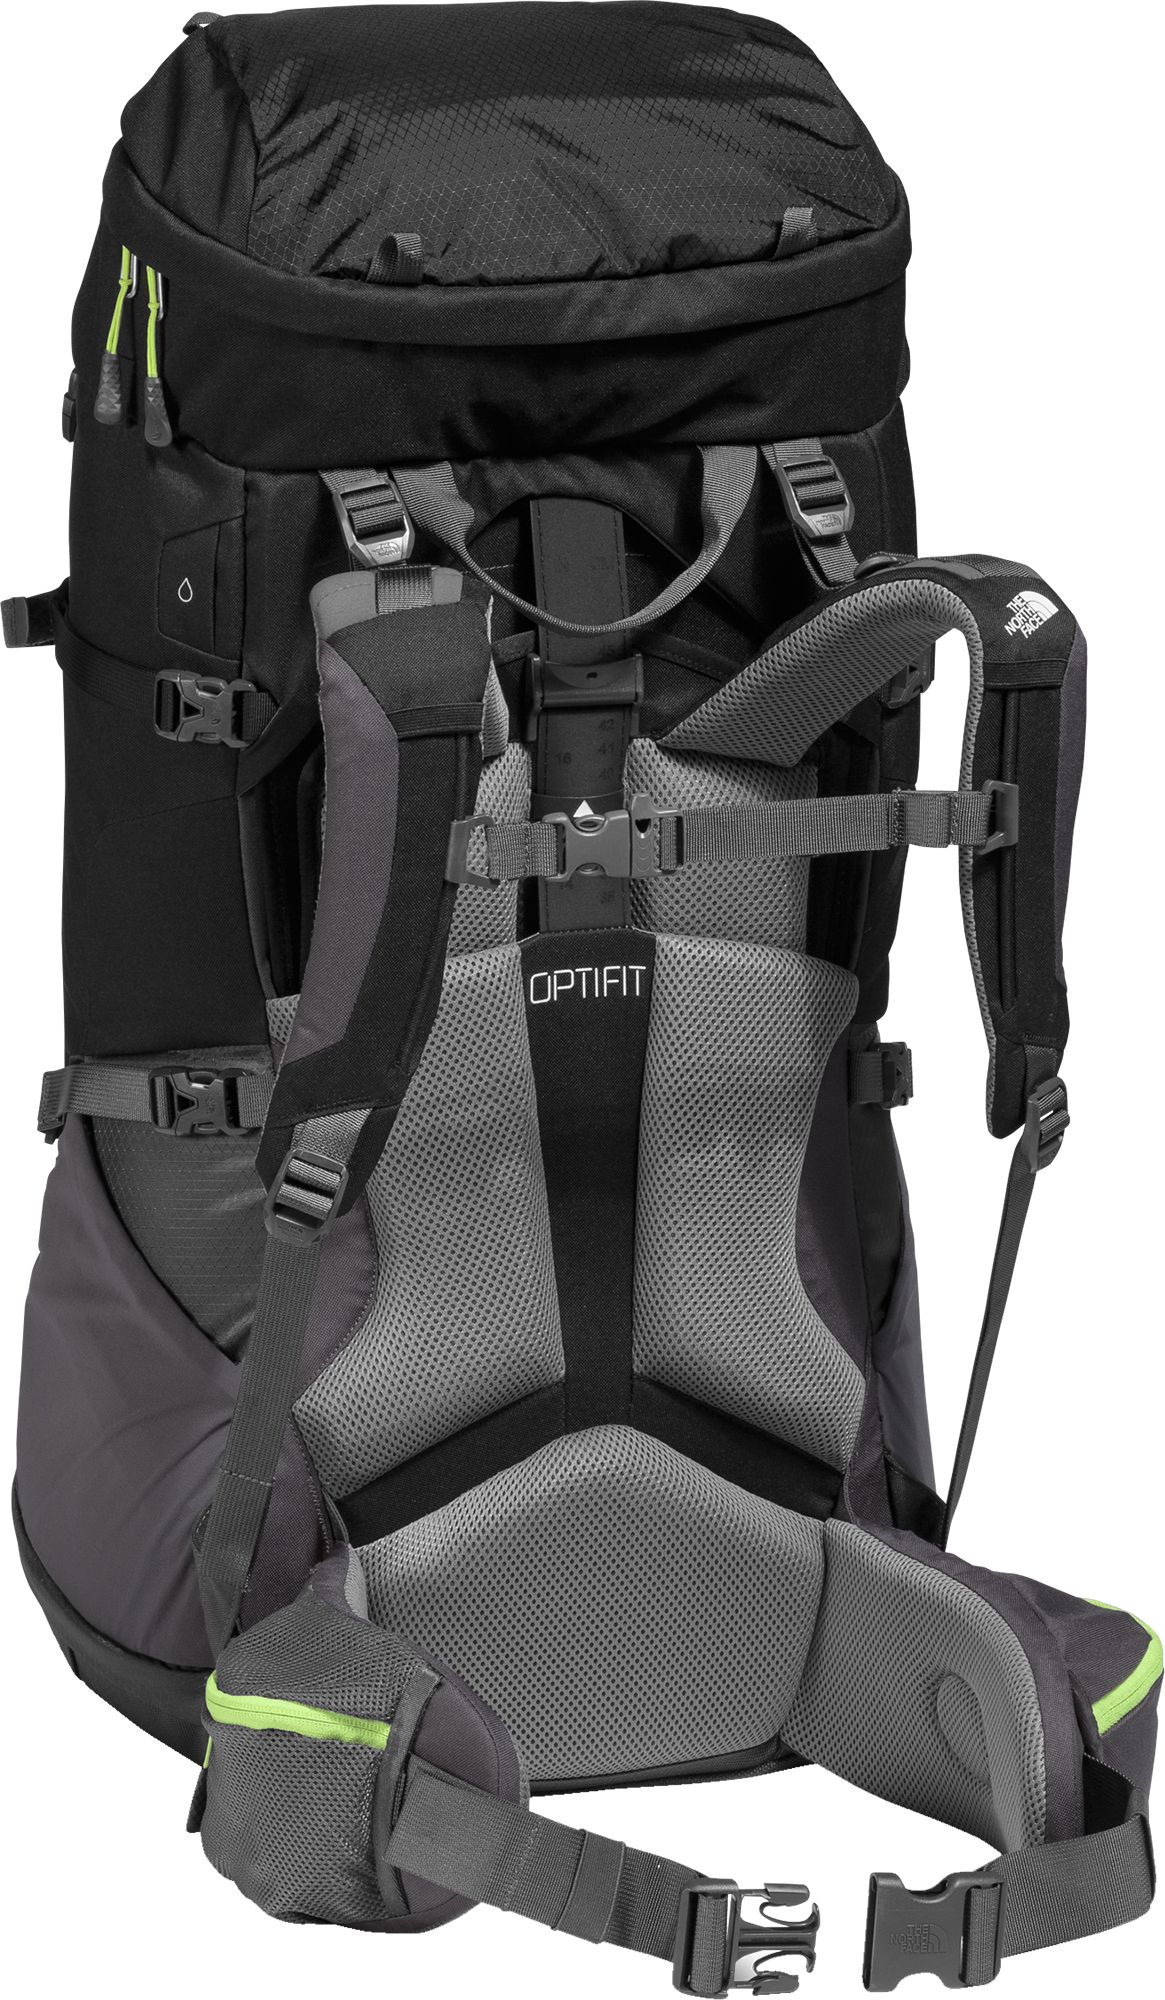 north face backpack 60l